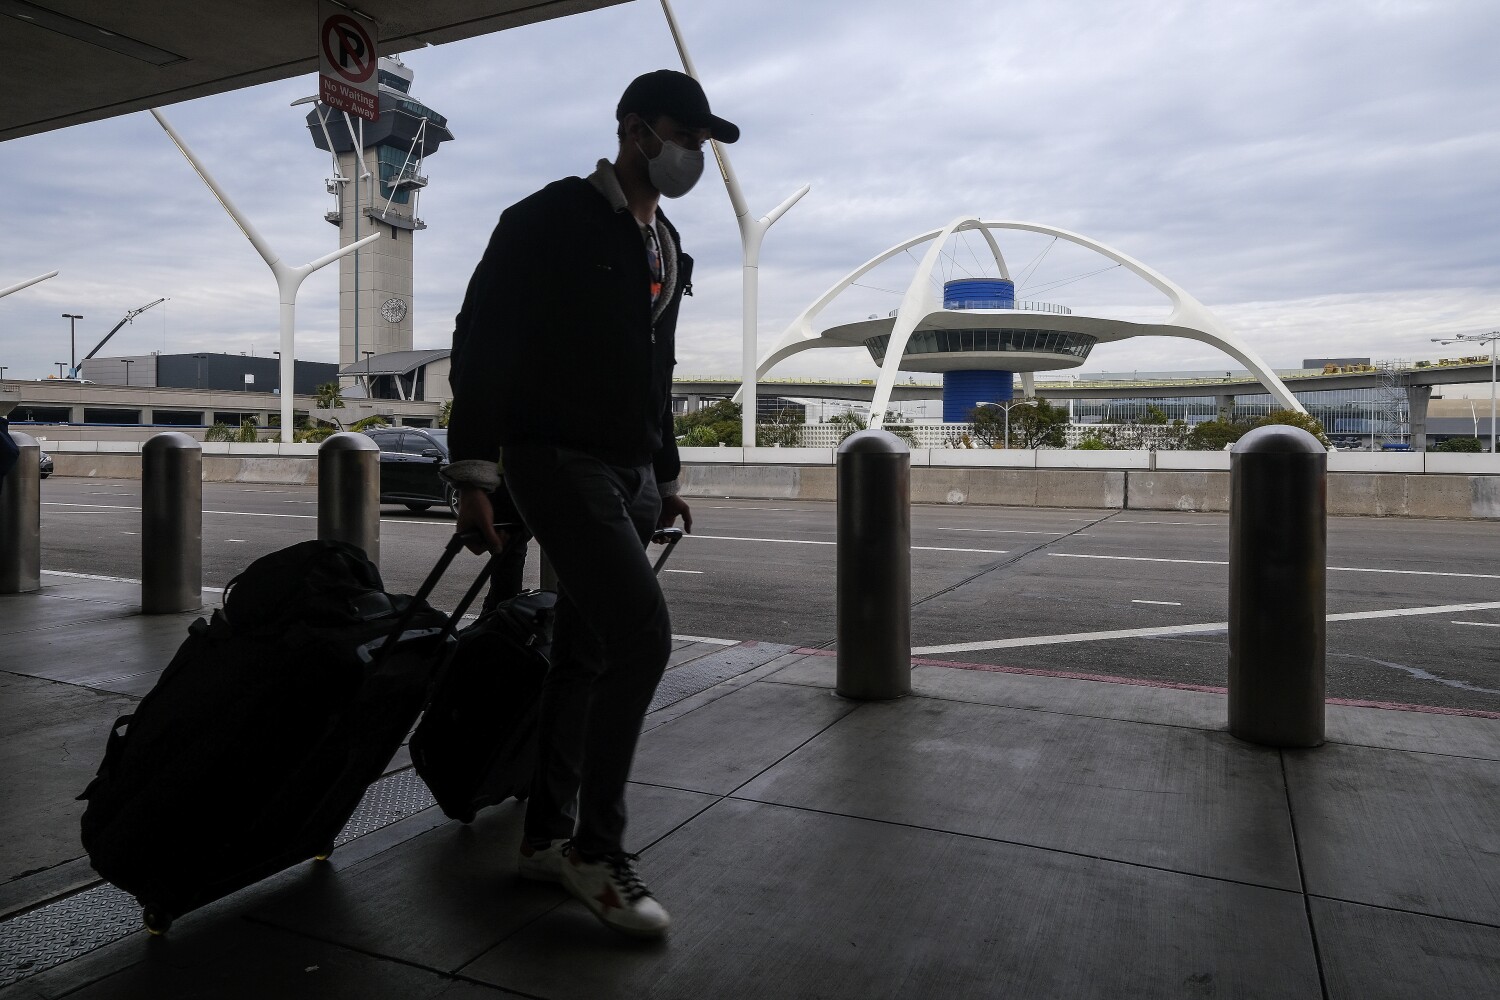 Dozens of flights canceled at LAX as airlines continue to struggle with bad weather, crew shortages 